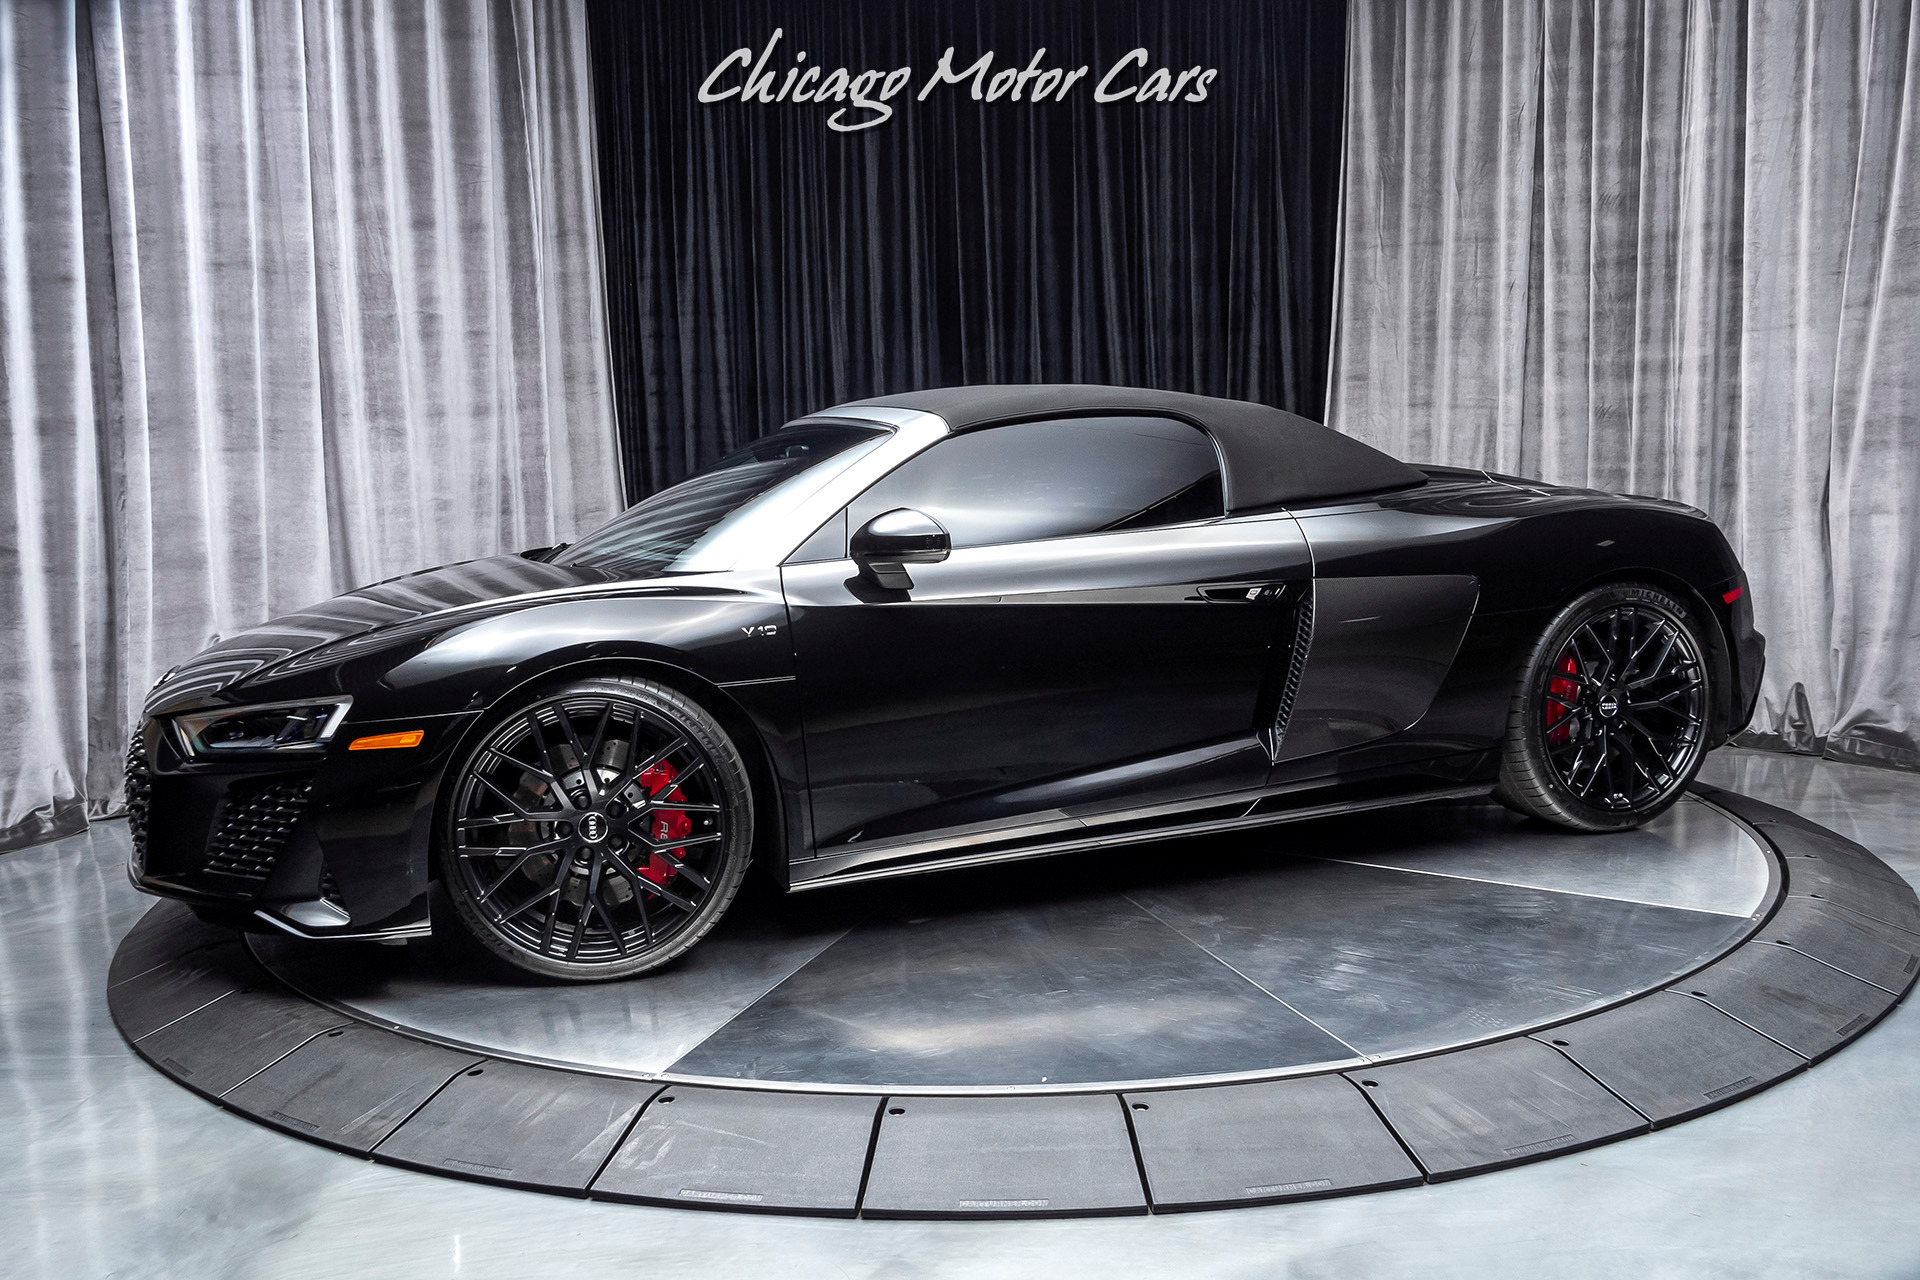 Billy ged antydning Derfra Used 2020 Audi R8 5.2L V10 Quattro Spyder Convertible MSRP $203k+ ONLY  2,700 MILES! For Sale (Special Pricing) | Chicago Motor Cars Stock #16974